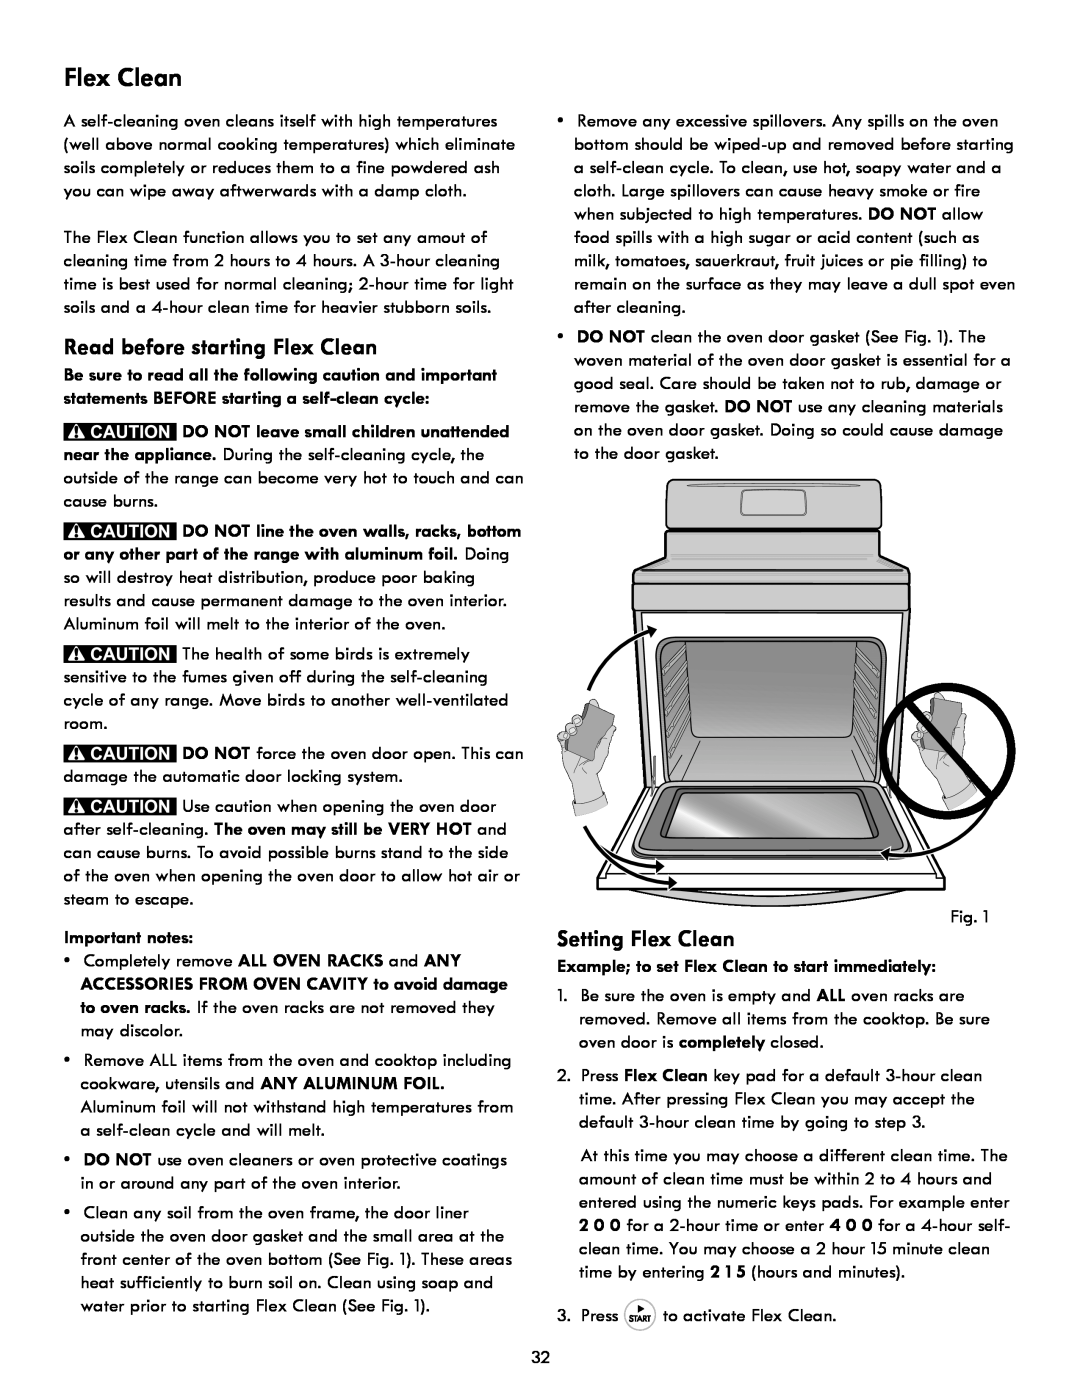 Kenmore 790 manual Read before starting Flex Clean, Setting Flex Clean, Important notes 